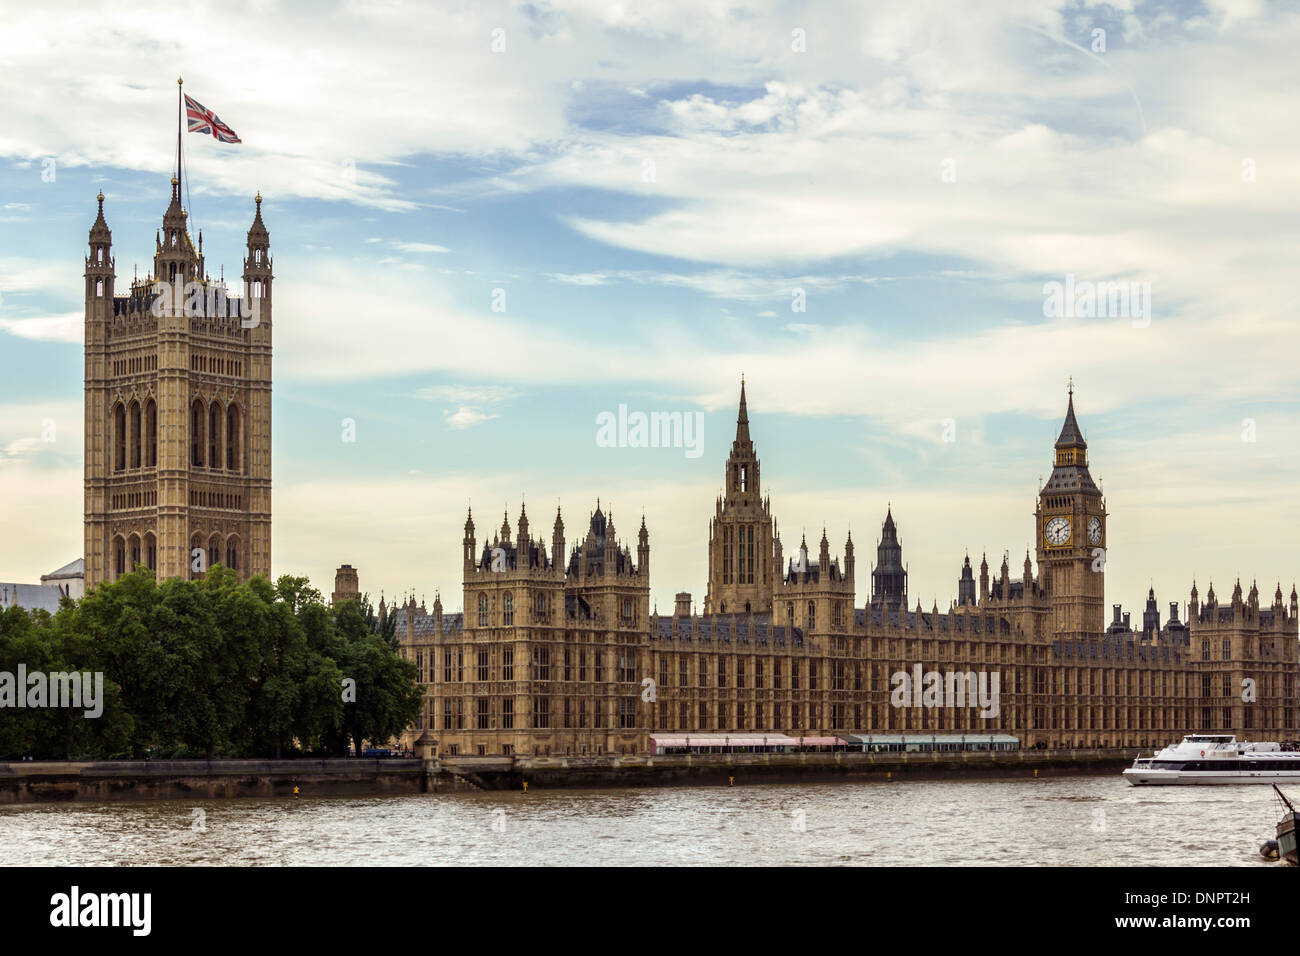 Palace of Westminster (Houses of Parliament) and Big Ben on the Thames, London, UK Stock Photo